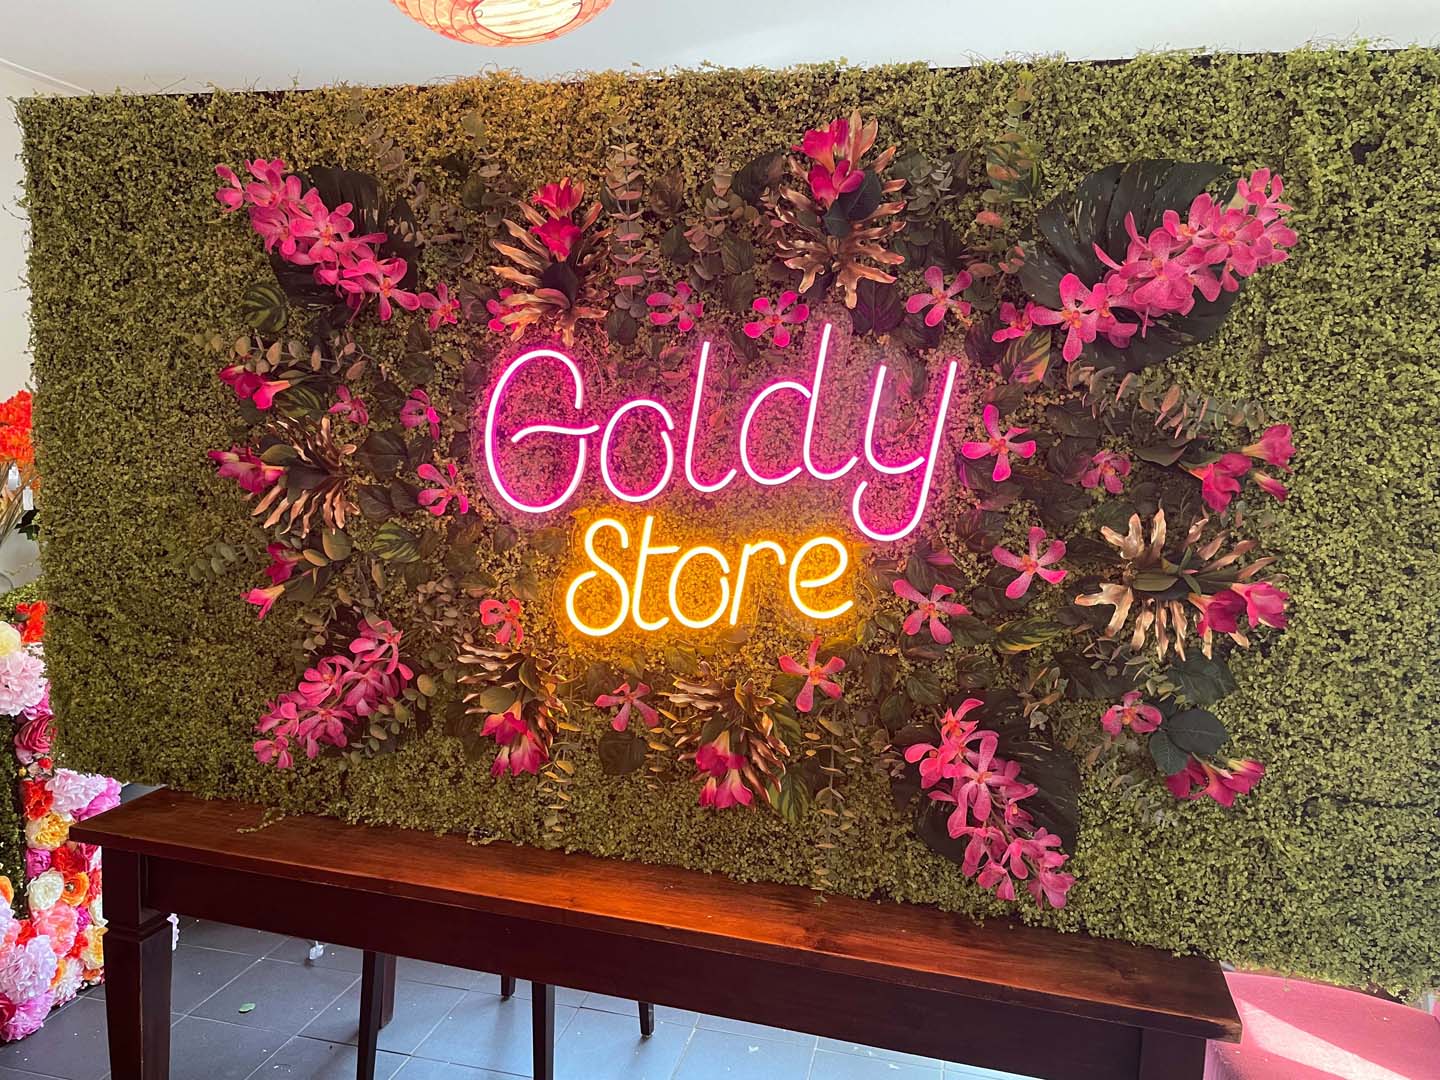 Goldy store